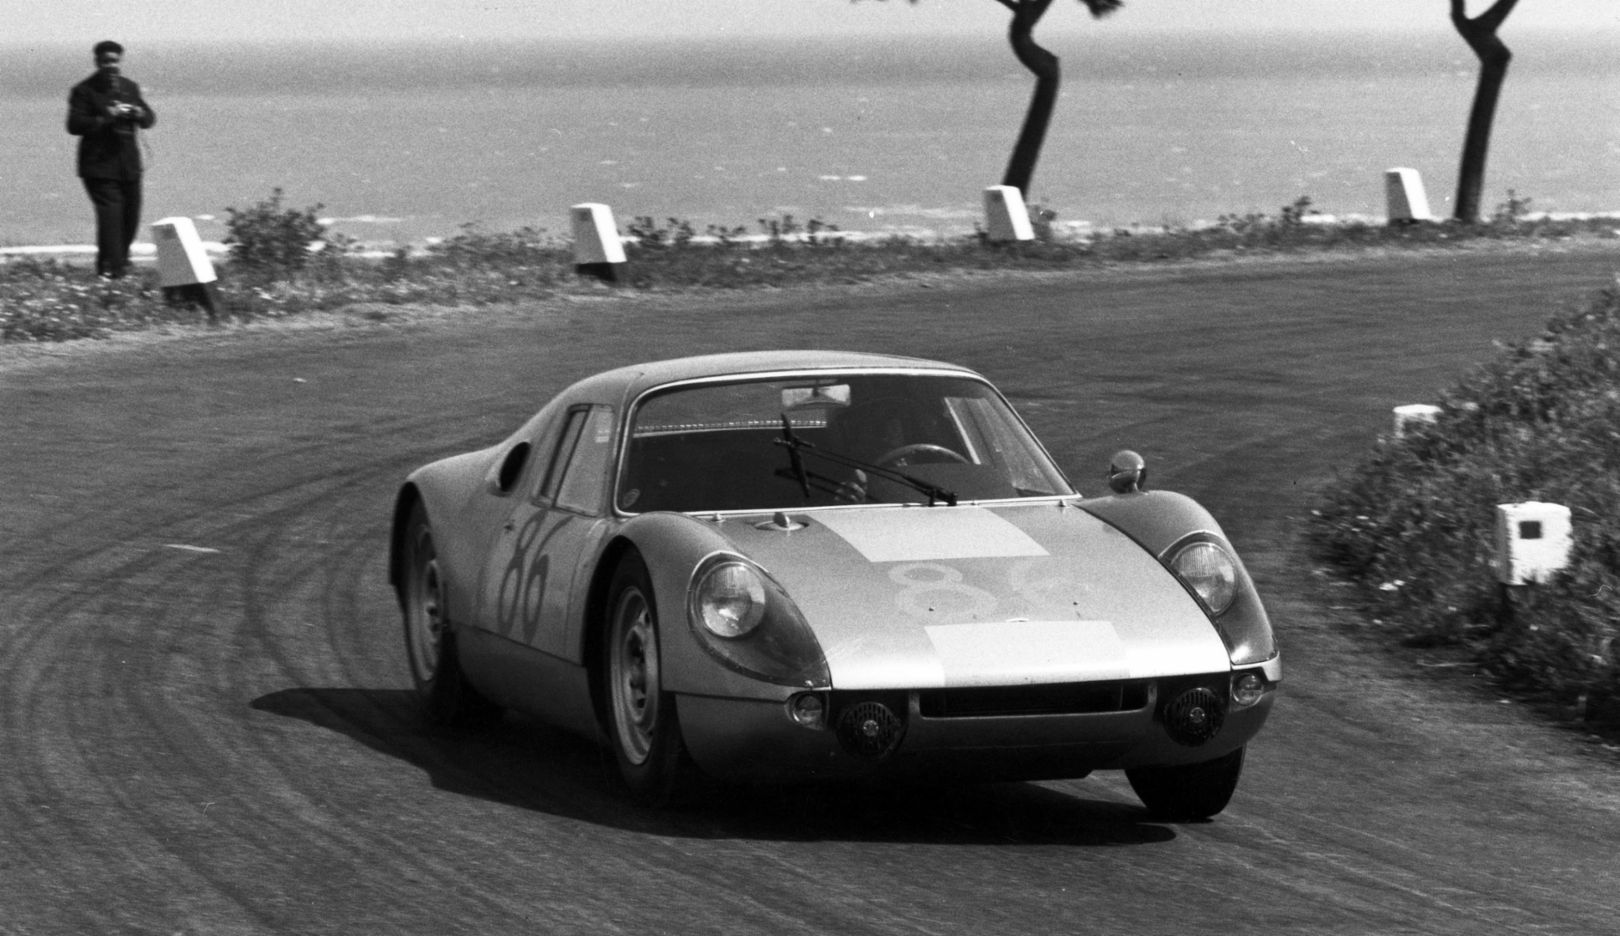 In the 1964 Targa Florio, the race car with the number 86 made it to the top of the overall ranking. The winners sitting inside were Colin Davis und Baron Antonio Pucci.